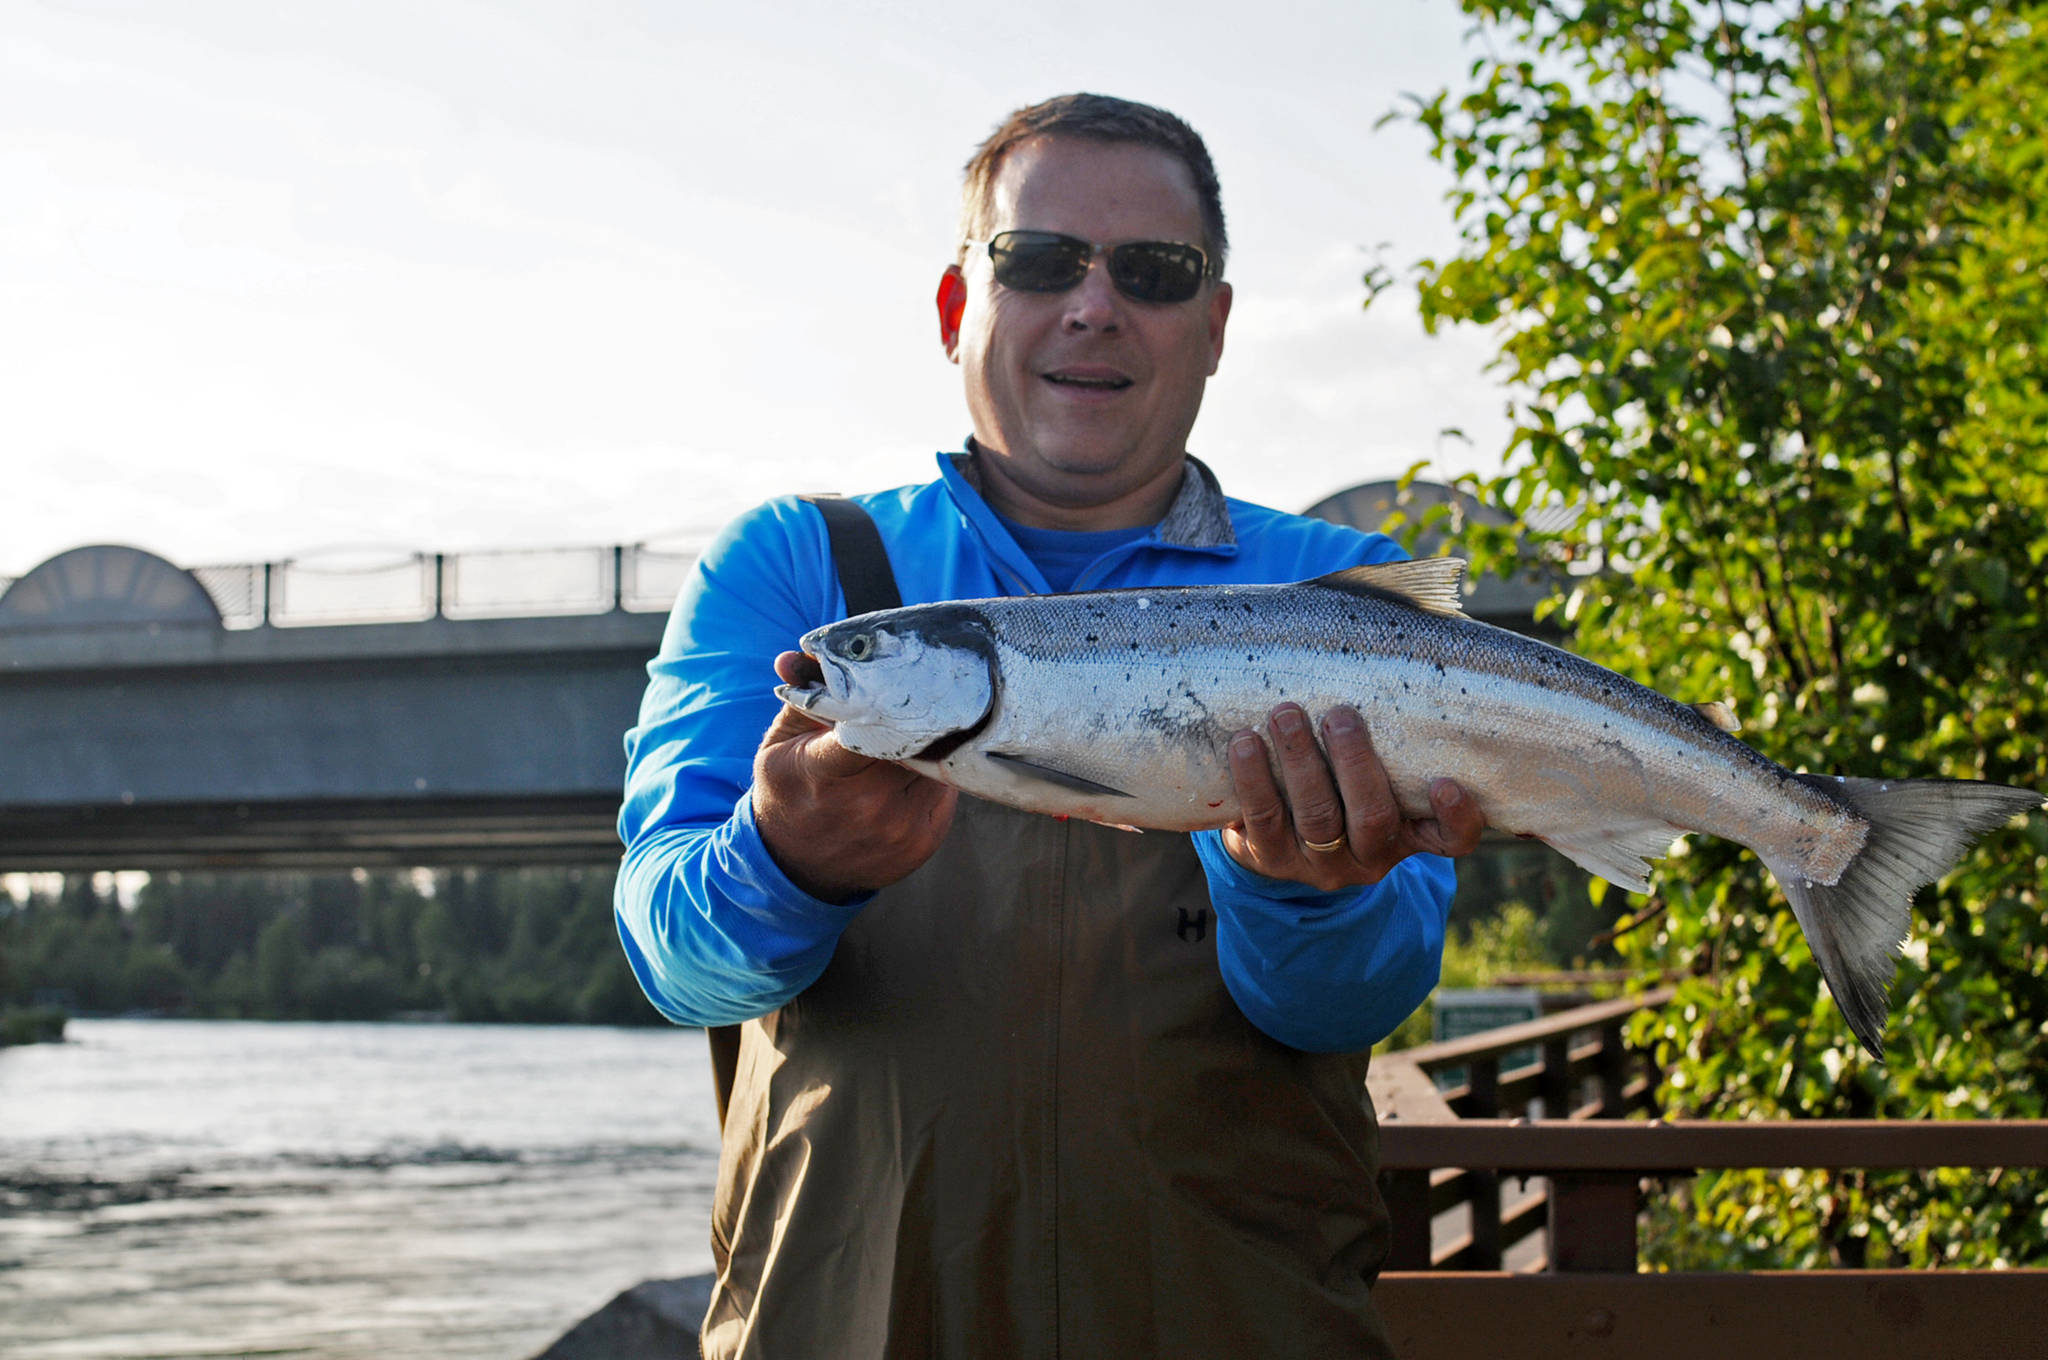 Tom Lyman of Michigan holds up a sockeye salmon he caught in the Kenai River on Wednesday, July 12, 2017 in Soldotna, Alaska. Lyman, who is visiting Alaska with his son, said he hadn’t been casting for long when he hooked into the fish. (Photo by Elizabeth Earl/Peninsula Clarion)